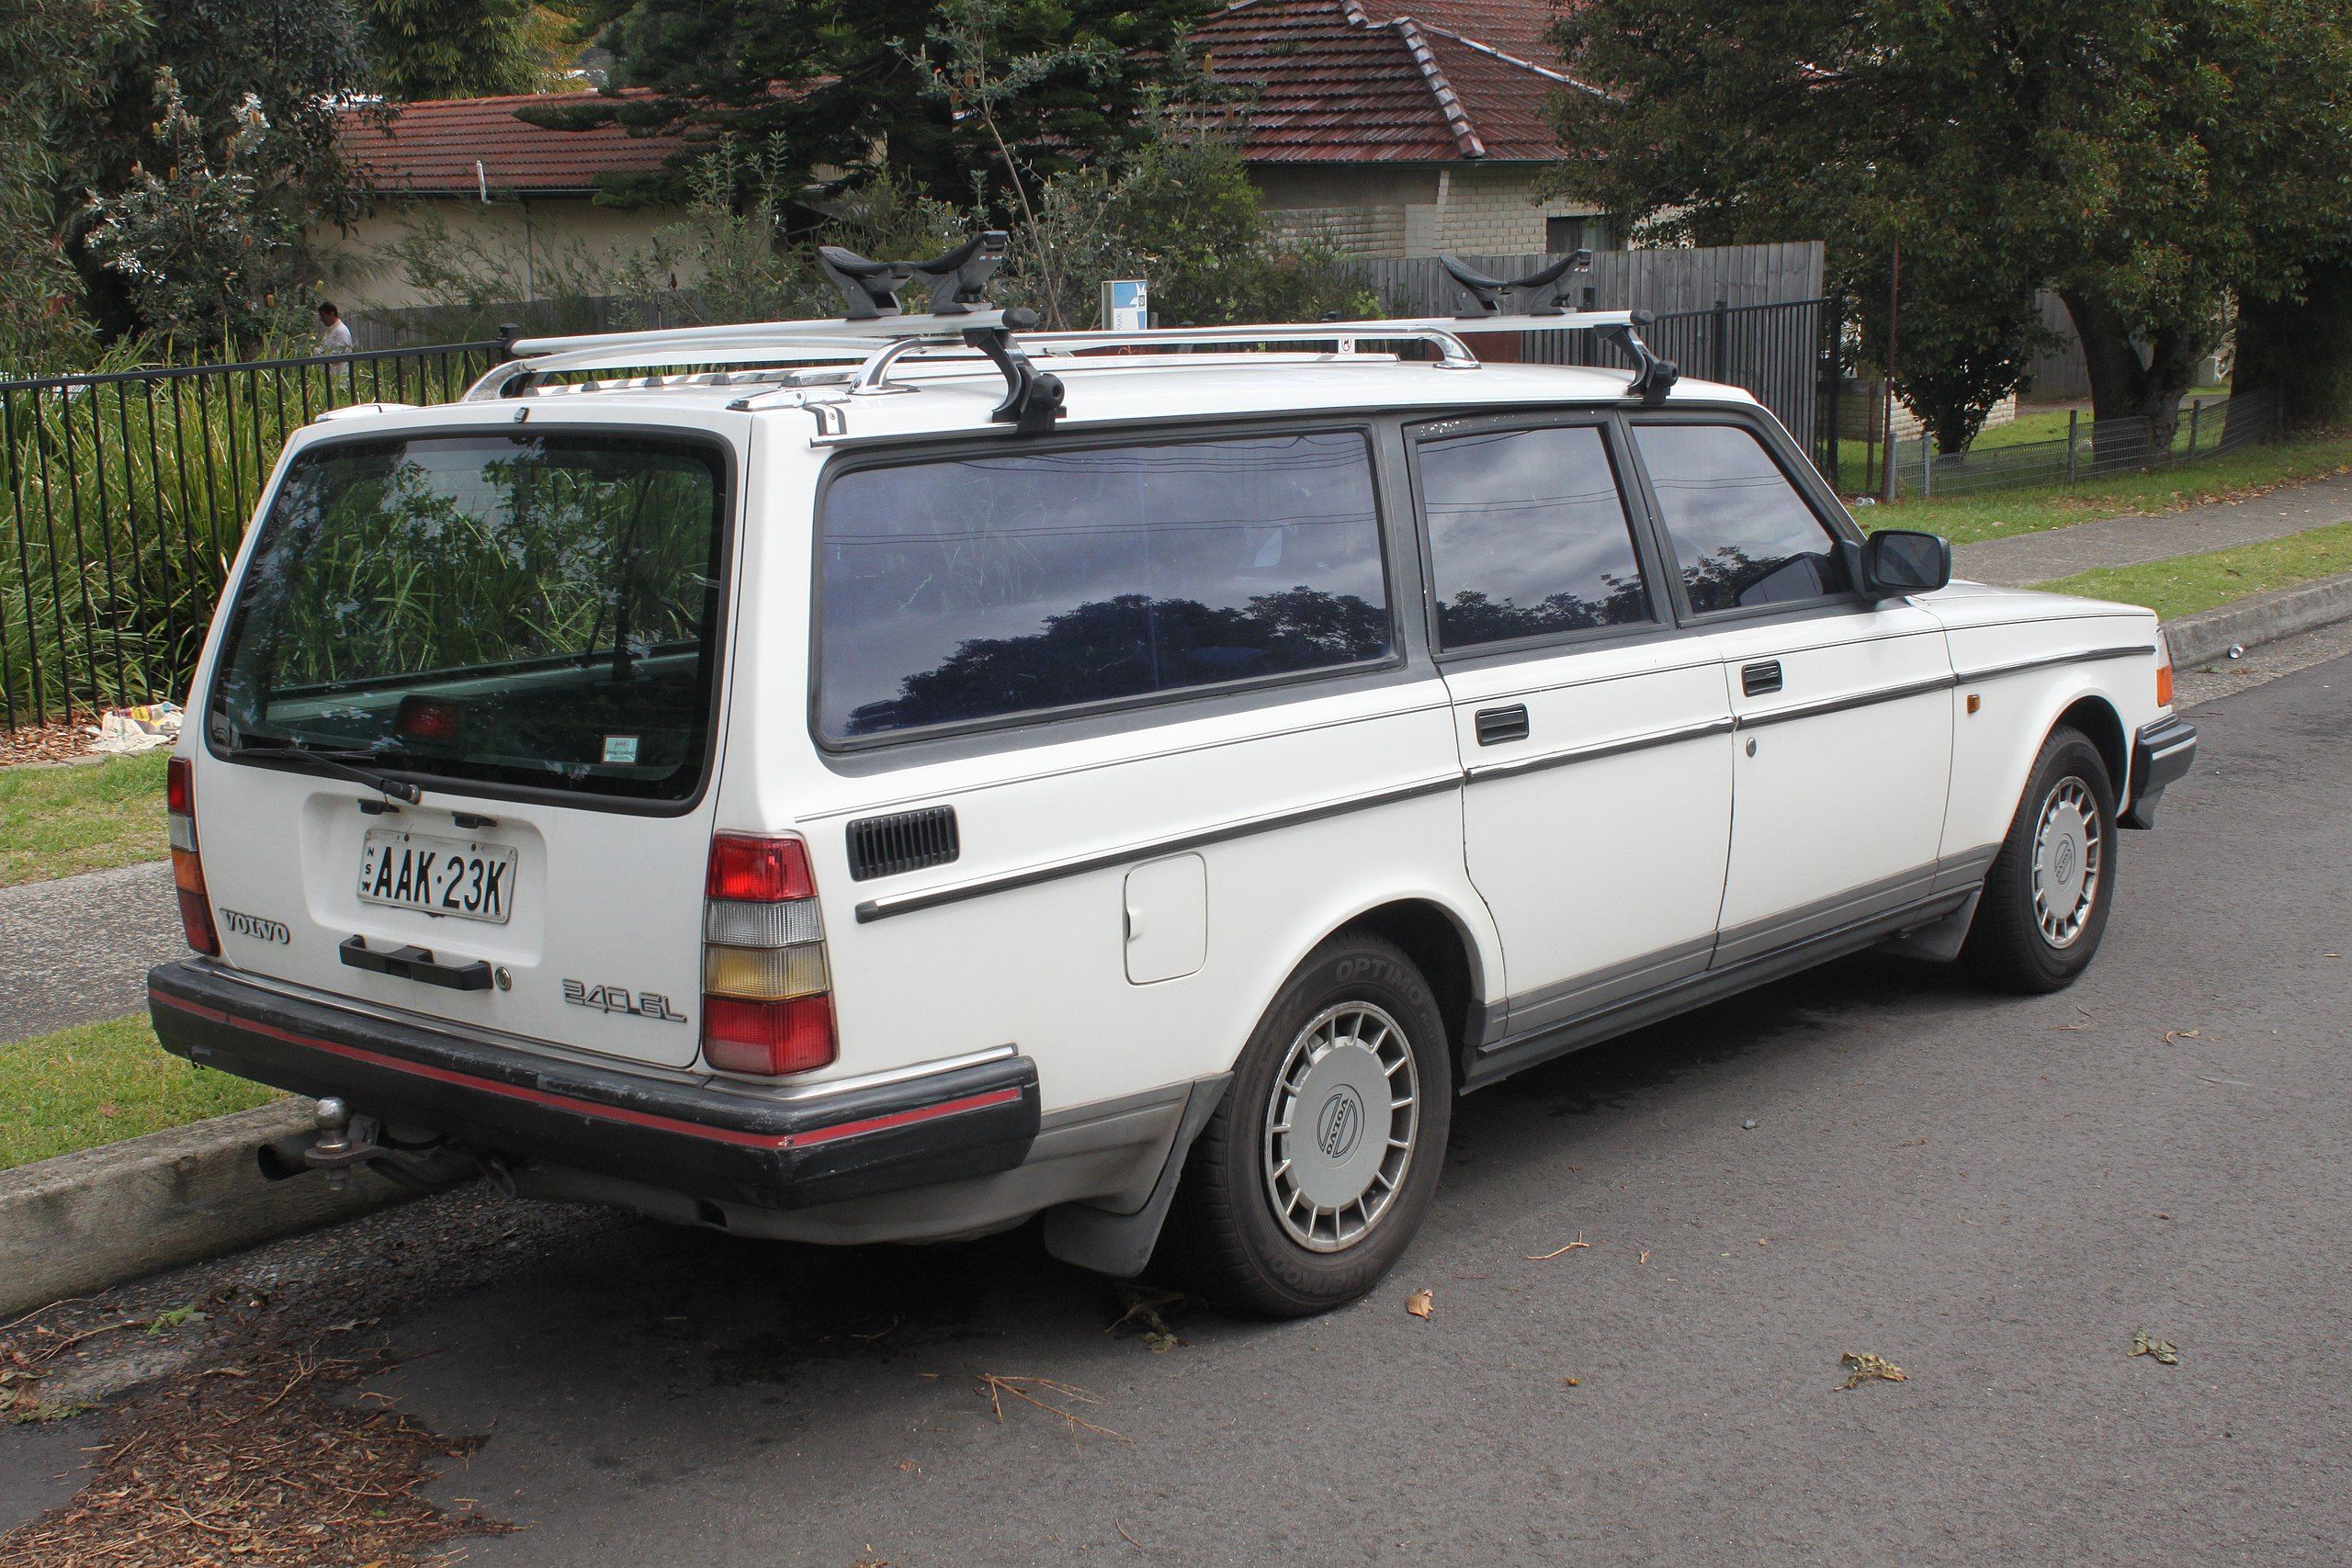 The rear end of the 1991 Volvo 240 GL Station Wagon.